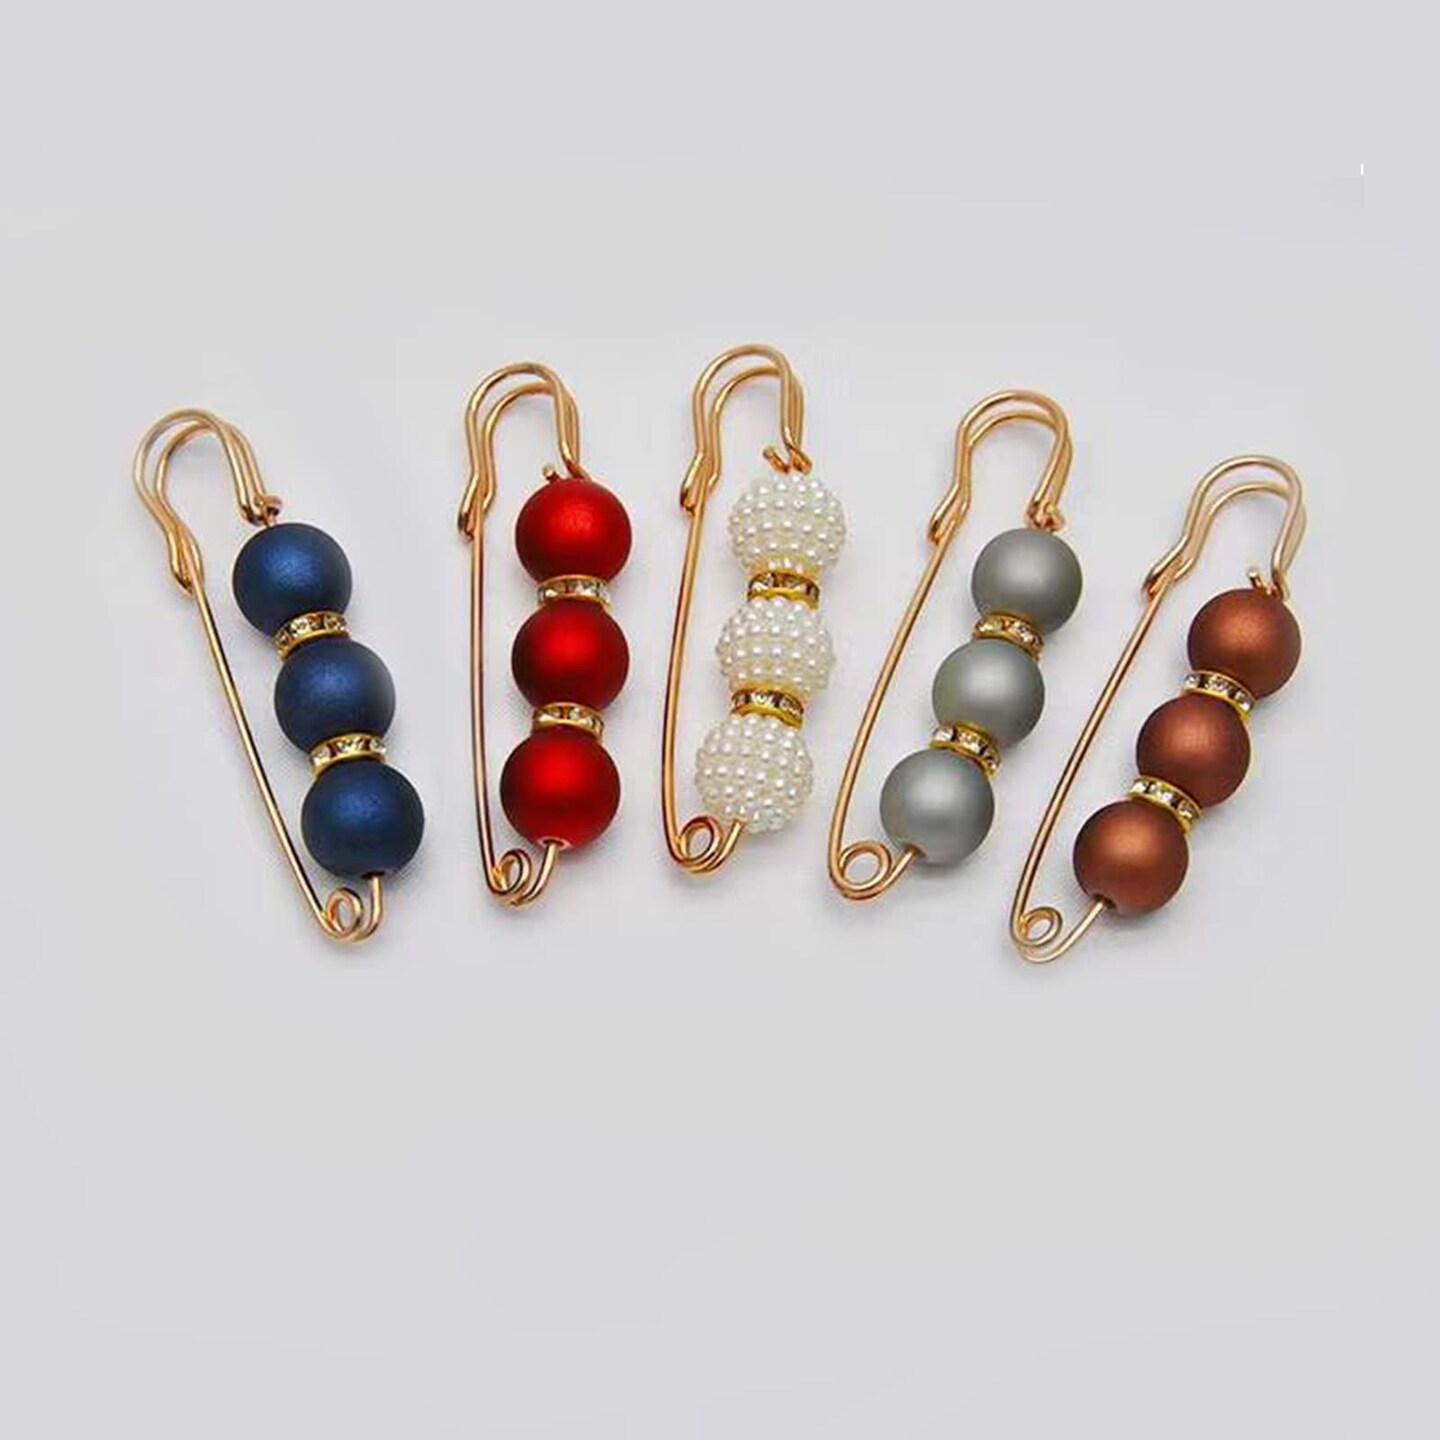 5 Pcs Pearl Brooch Pins for Women Fashion, Brooch Pins for Crafts, Sweater Shawl Clip Double Gold Brooch Pins for Women&#xFF0C;Waist Pants Extender Safety Pins (Mixed color)